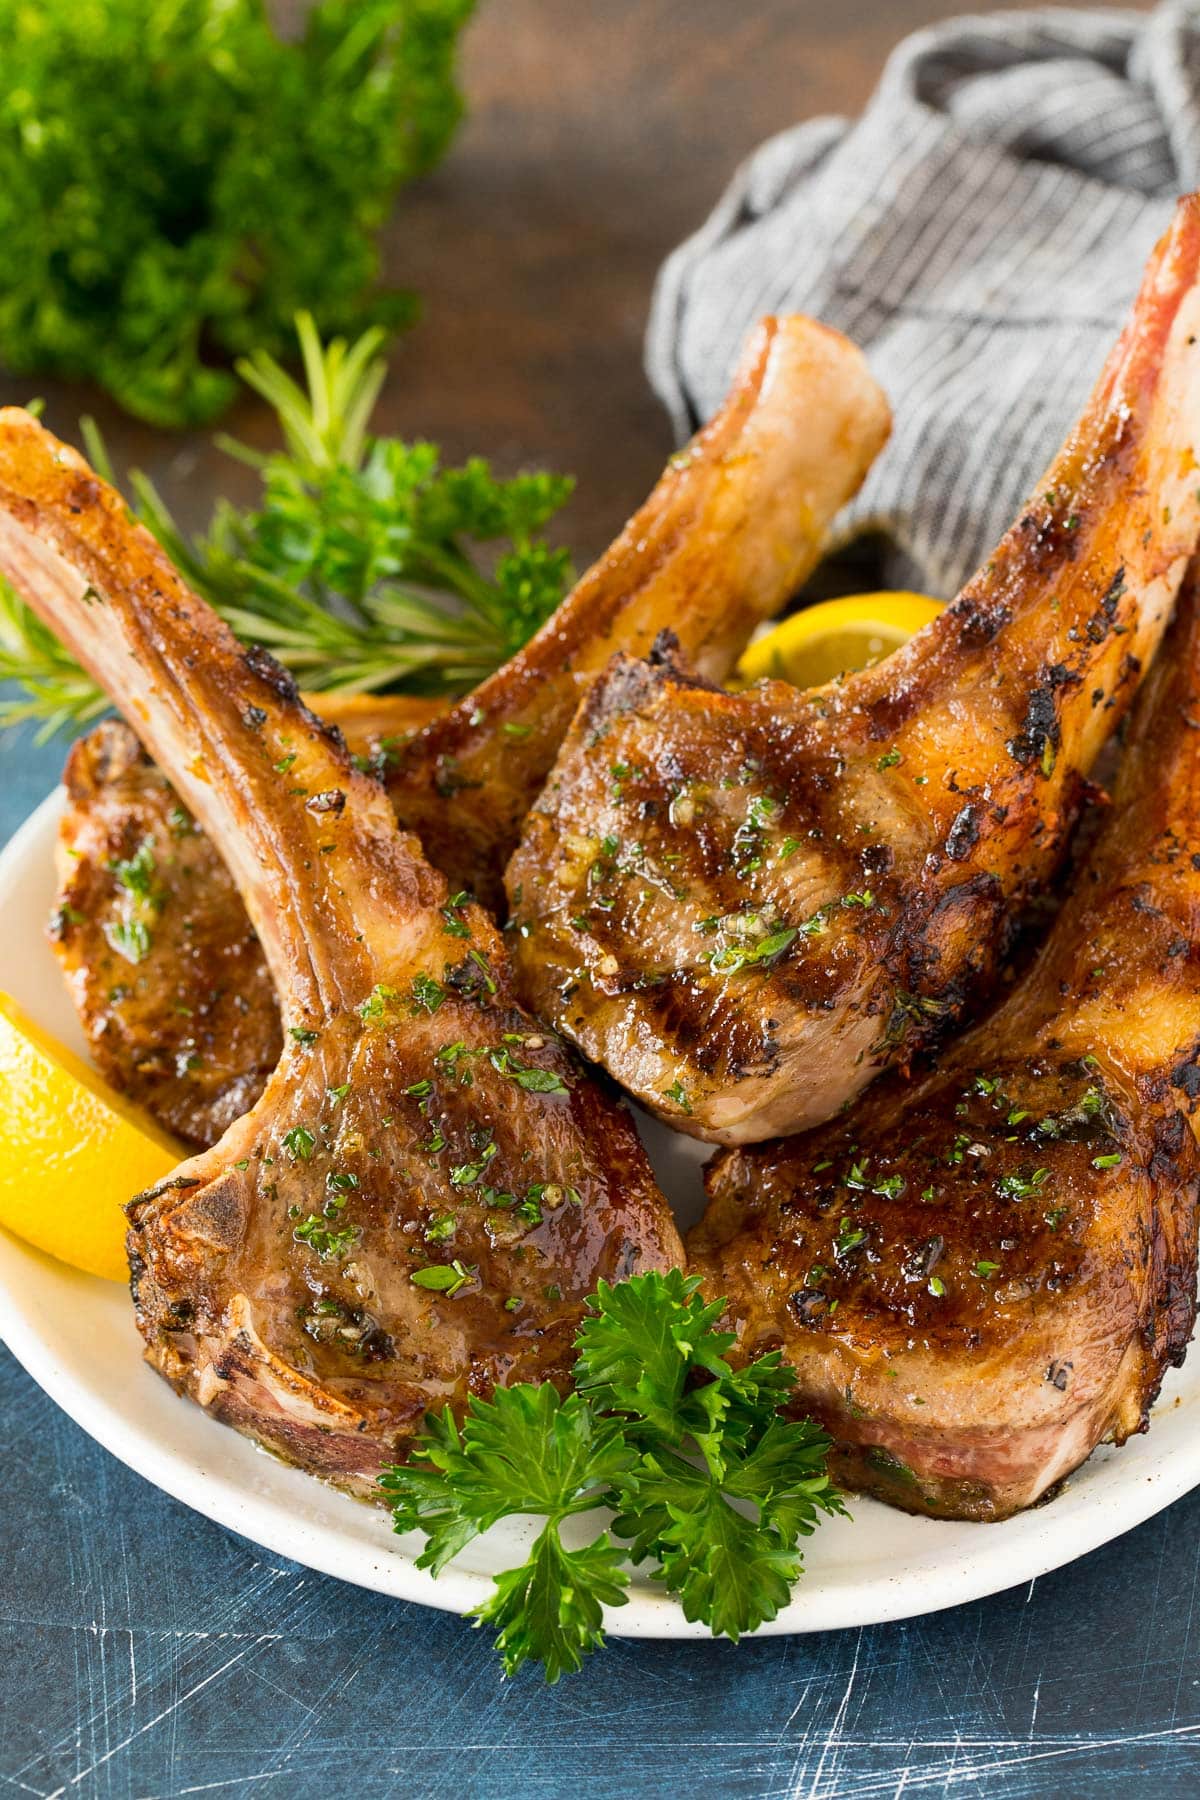 Grilled lamb chops on a plate garnished with parsley and lemon.